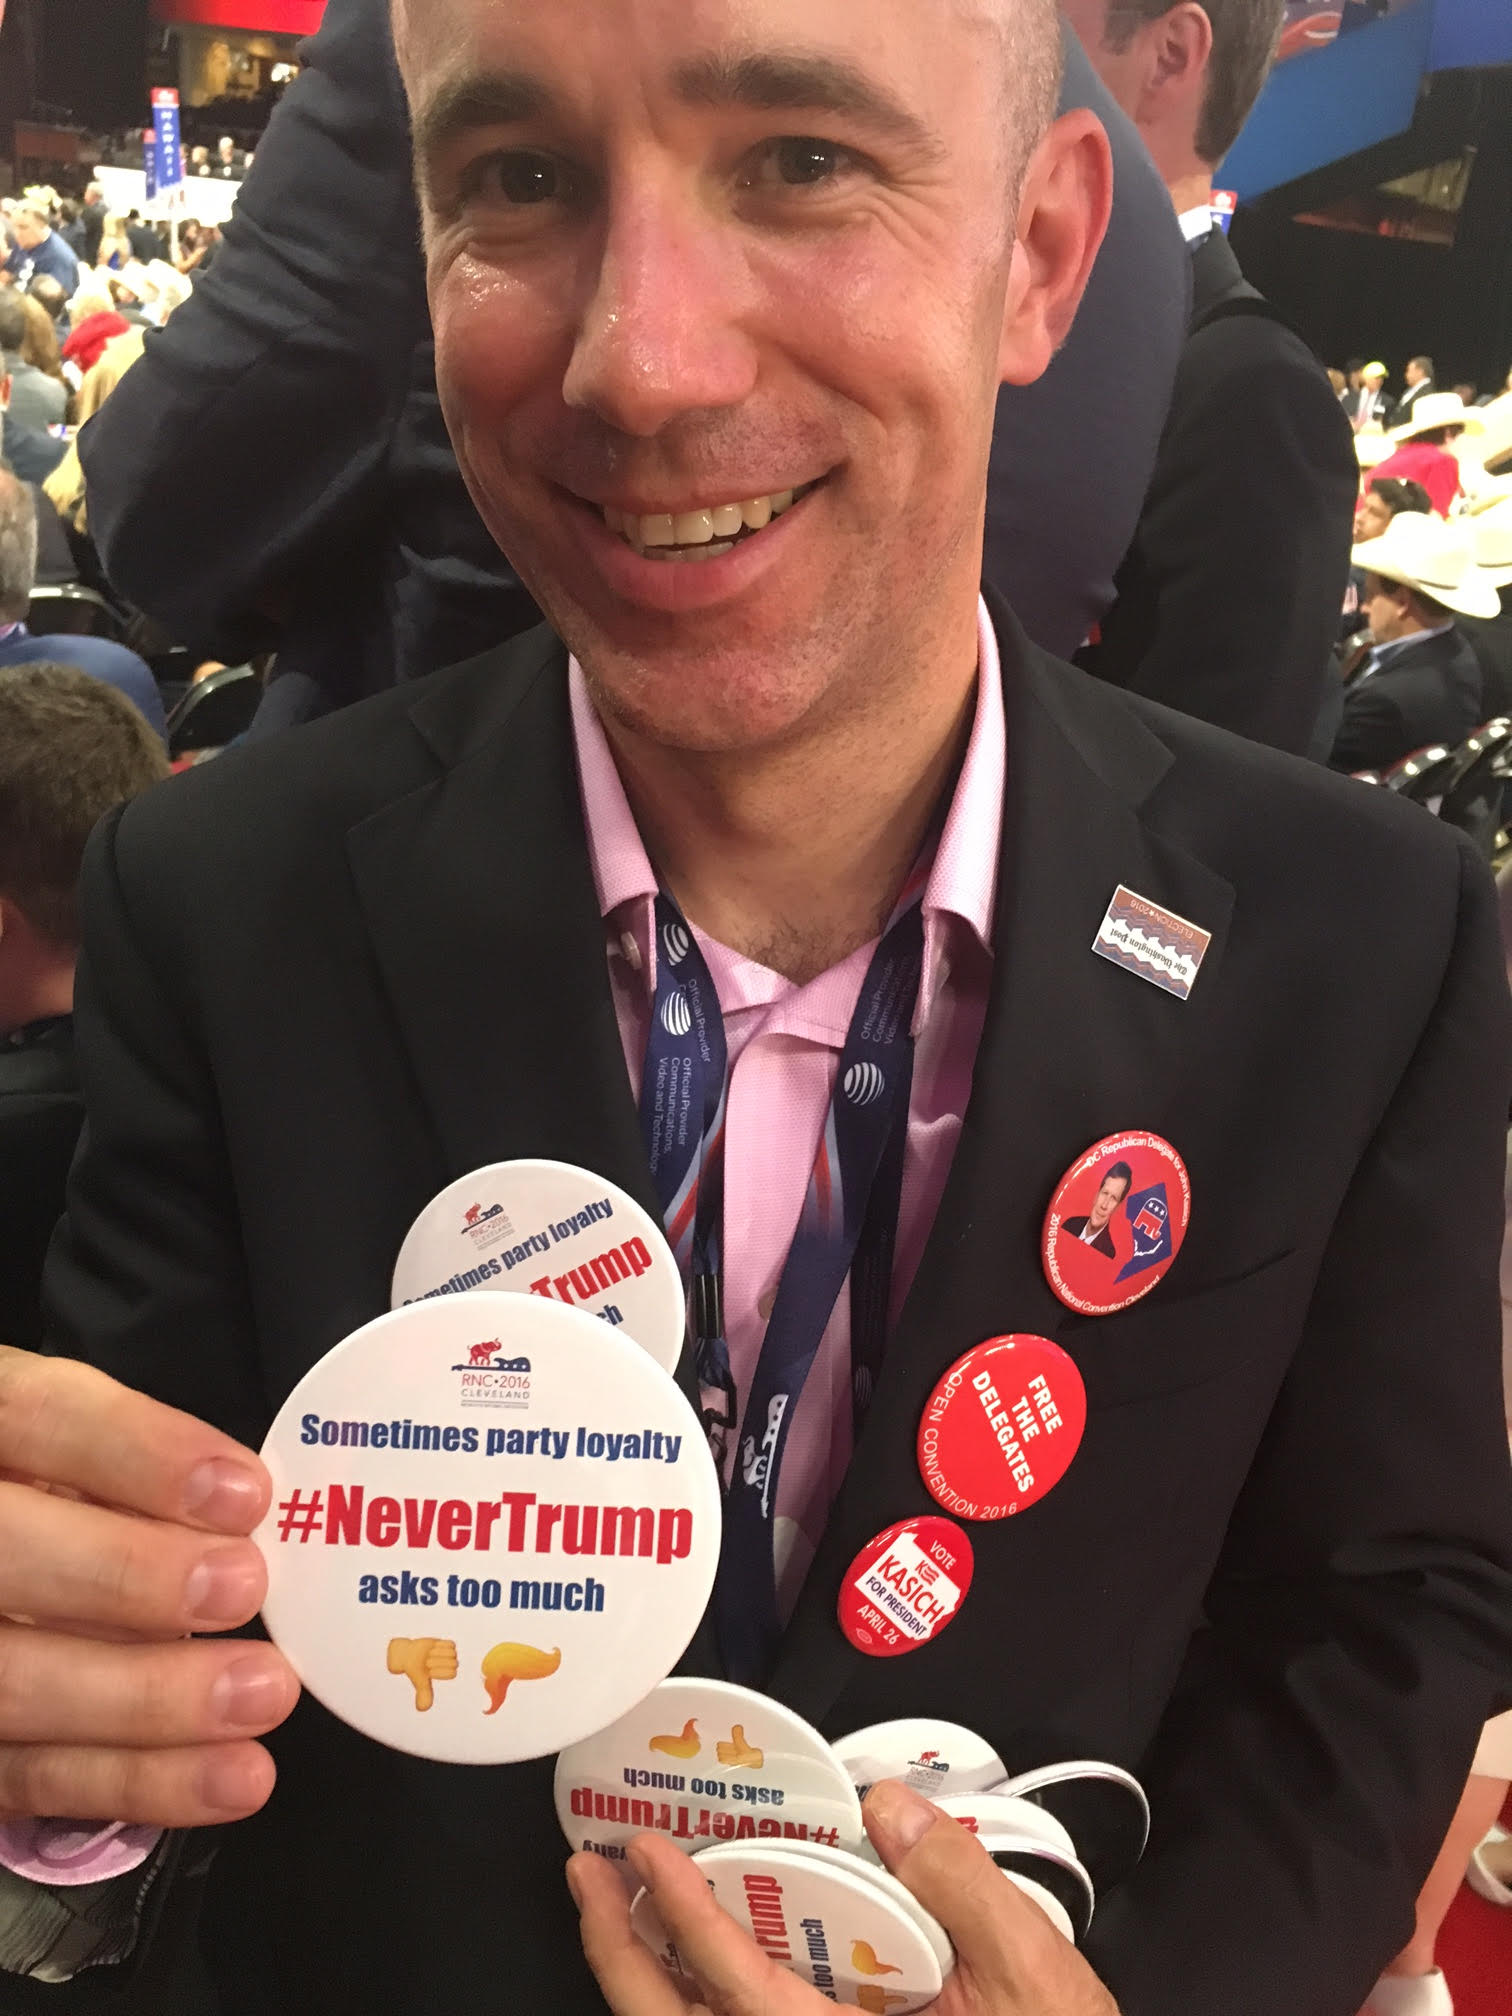 Justin Dillon, an alternate delegate from the District of Columbia is handing out 200 buttons opposing Donald Trump on the convention floor, in Cleveland, on July 21, 2016. (Zeke Miller for TIME)